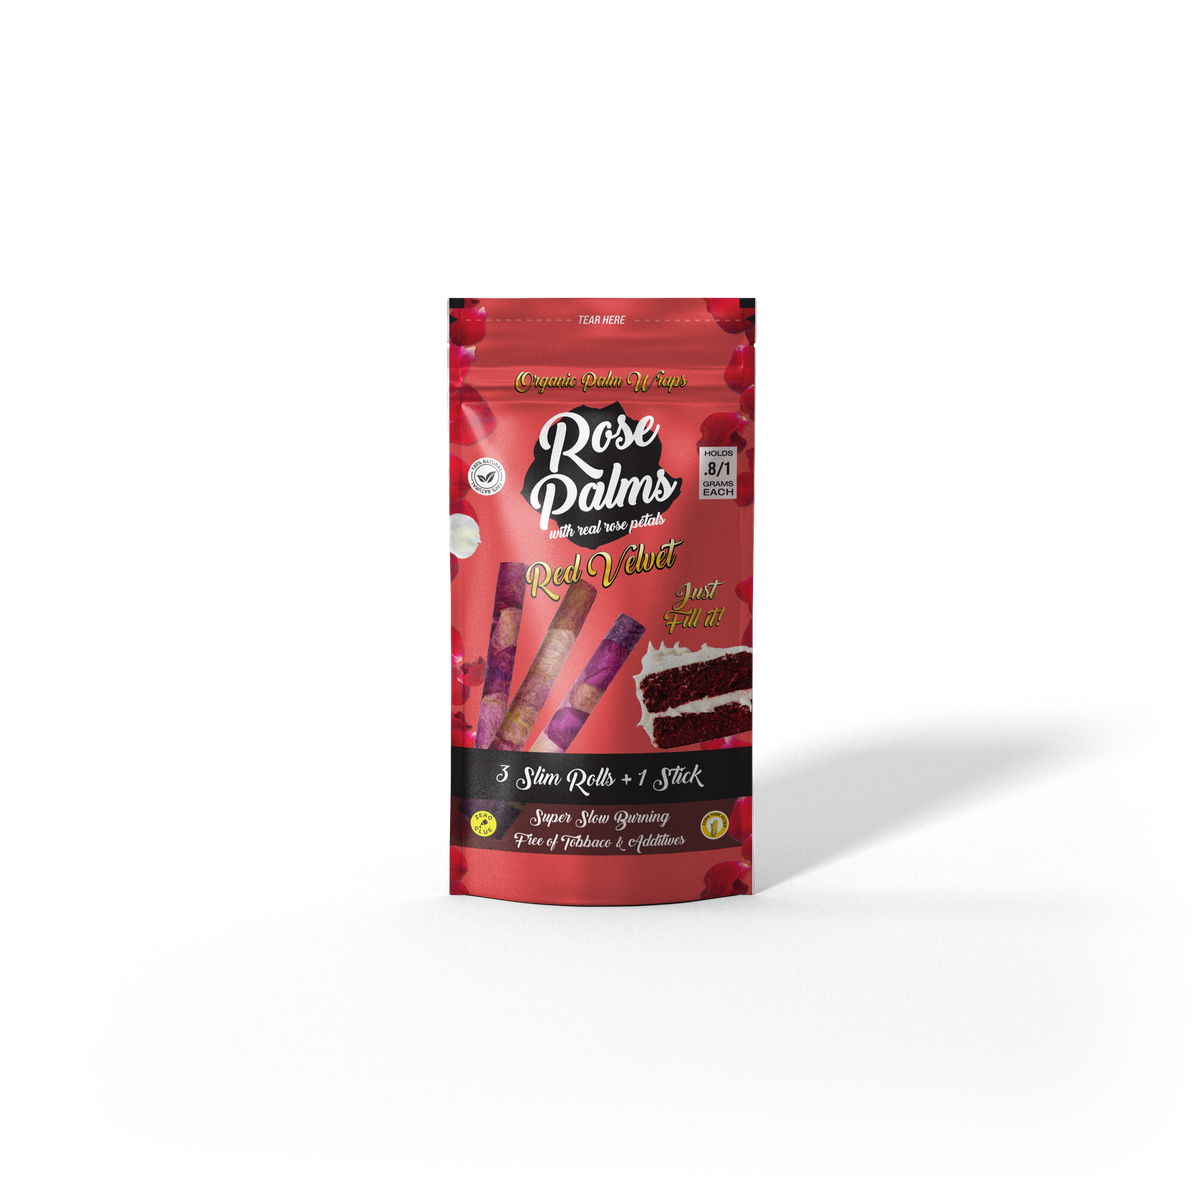 OME Rose Palms Wraps | Flavors and Sizes - 20 Count Display - Mj Wholesale